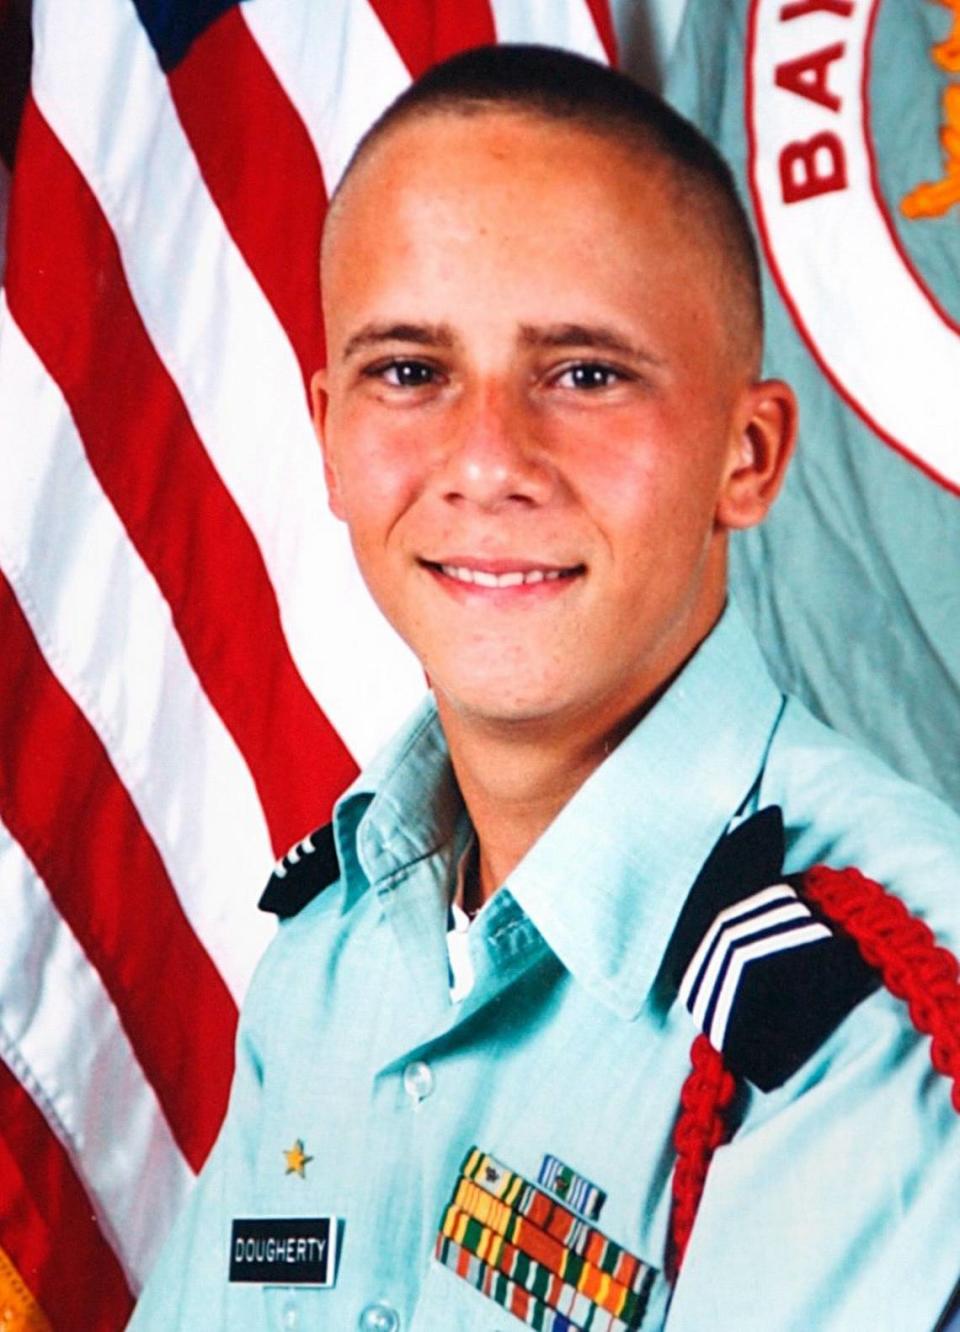 A photo of Lance Cpl. Scott Dougherty appears in a memorial collage at Griffith-Cline Funeral Home on Friday afternoon, July 16, 2004, in Bradenton during a visitation for family and friends of the fallen Marine from Bayshore High.